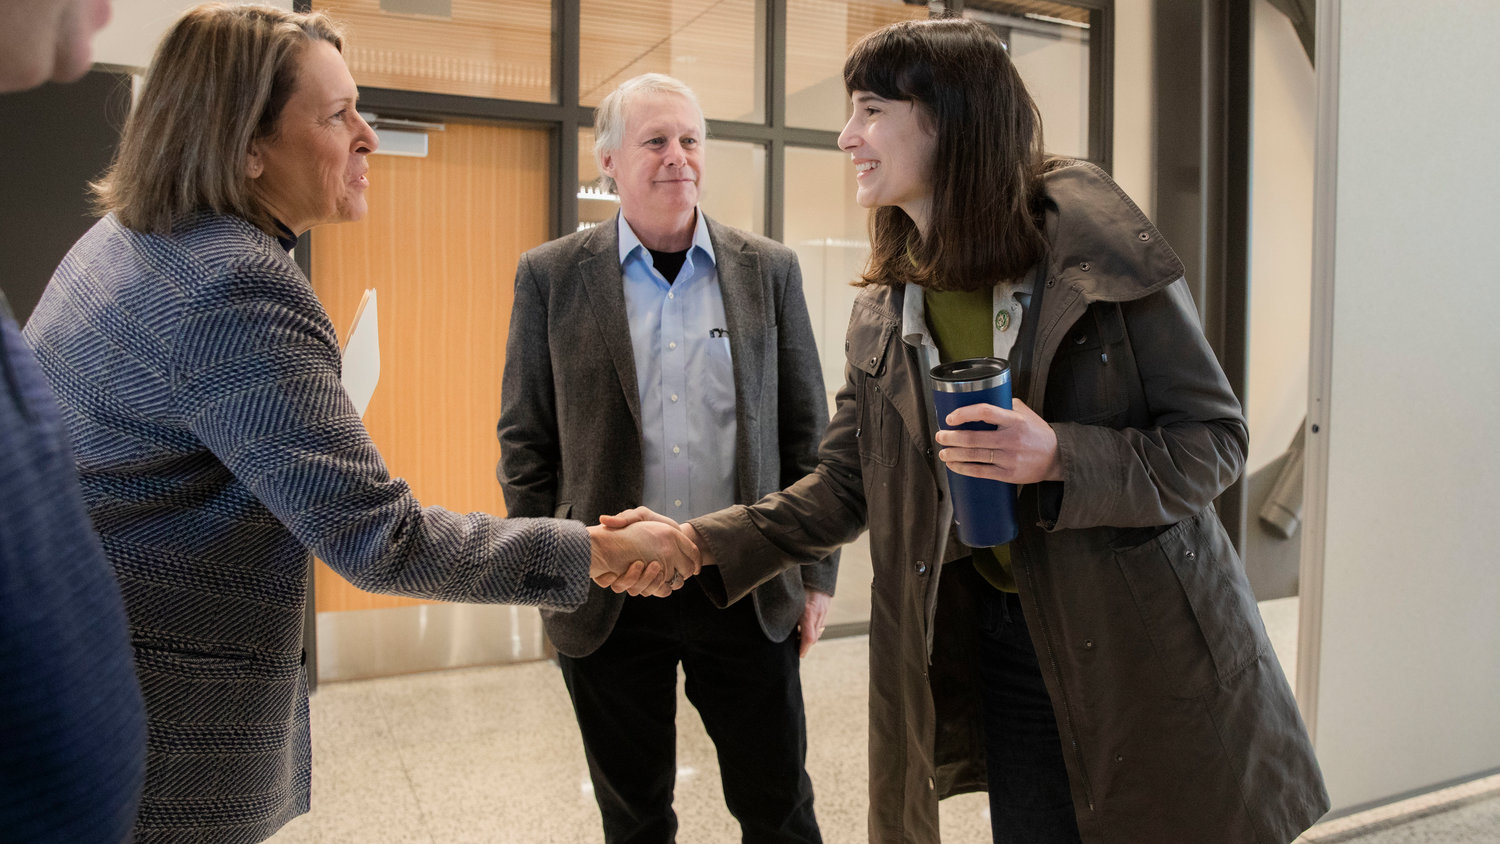 Marie Gluesenkamp Perez smiles and shakes hands with Monica Brummer, director of the Pacific Northwest Center of Excellence for Clean Energy at Centralia College, alongside Court Stanley during a tour of the campus on Friday.